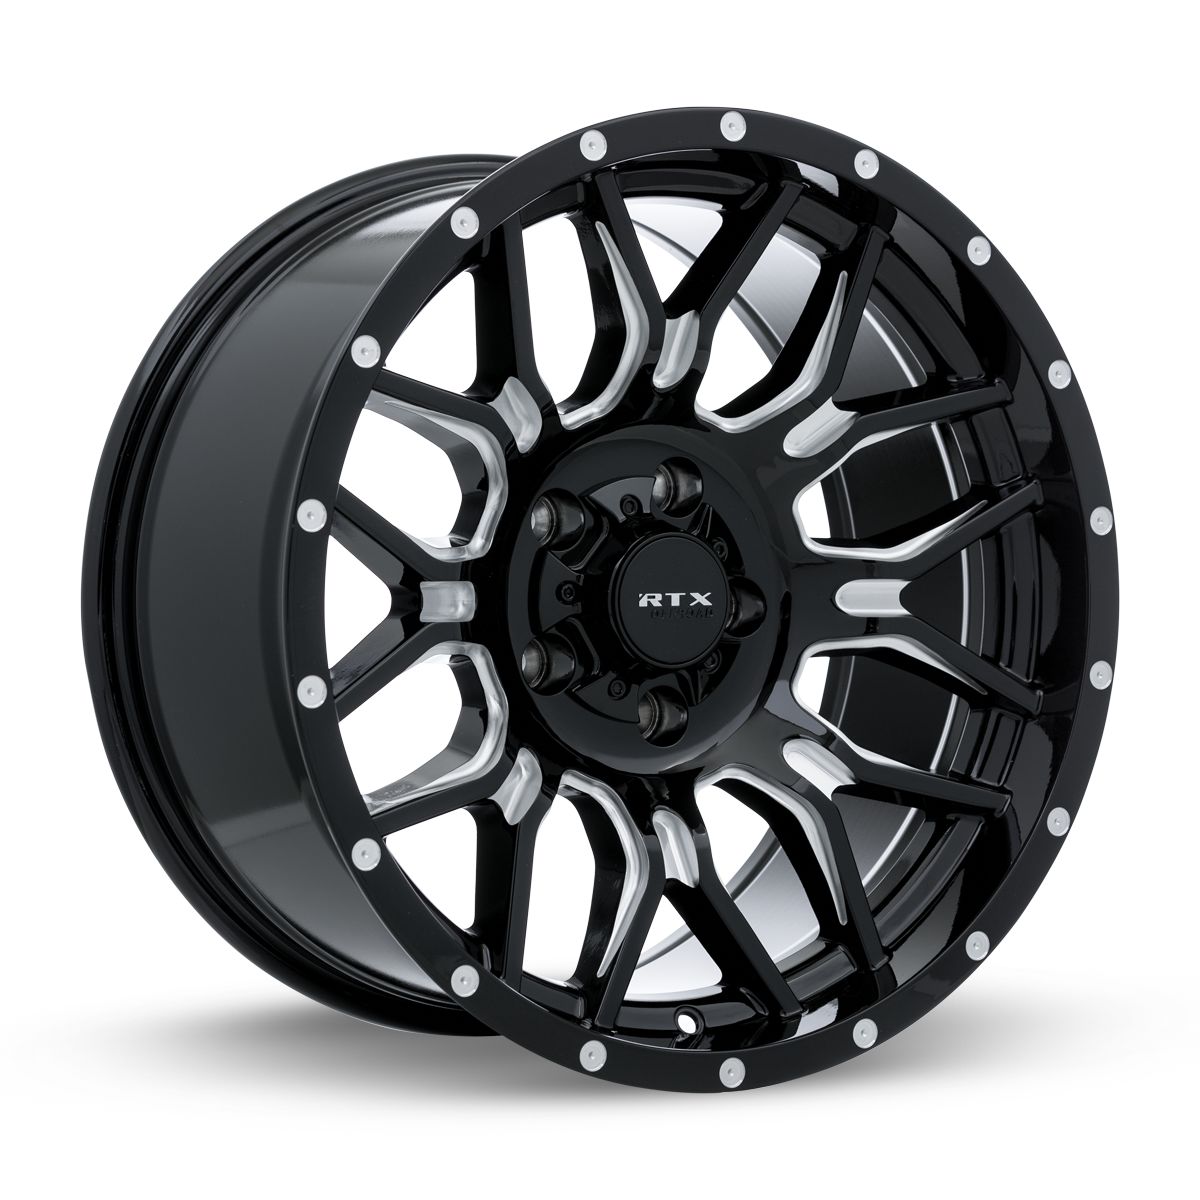 Claw • Gloss Black Milled with Rivets • 20x10 6x139.7 ET-18 CB106.1